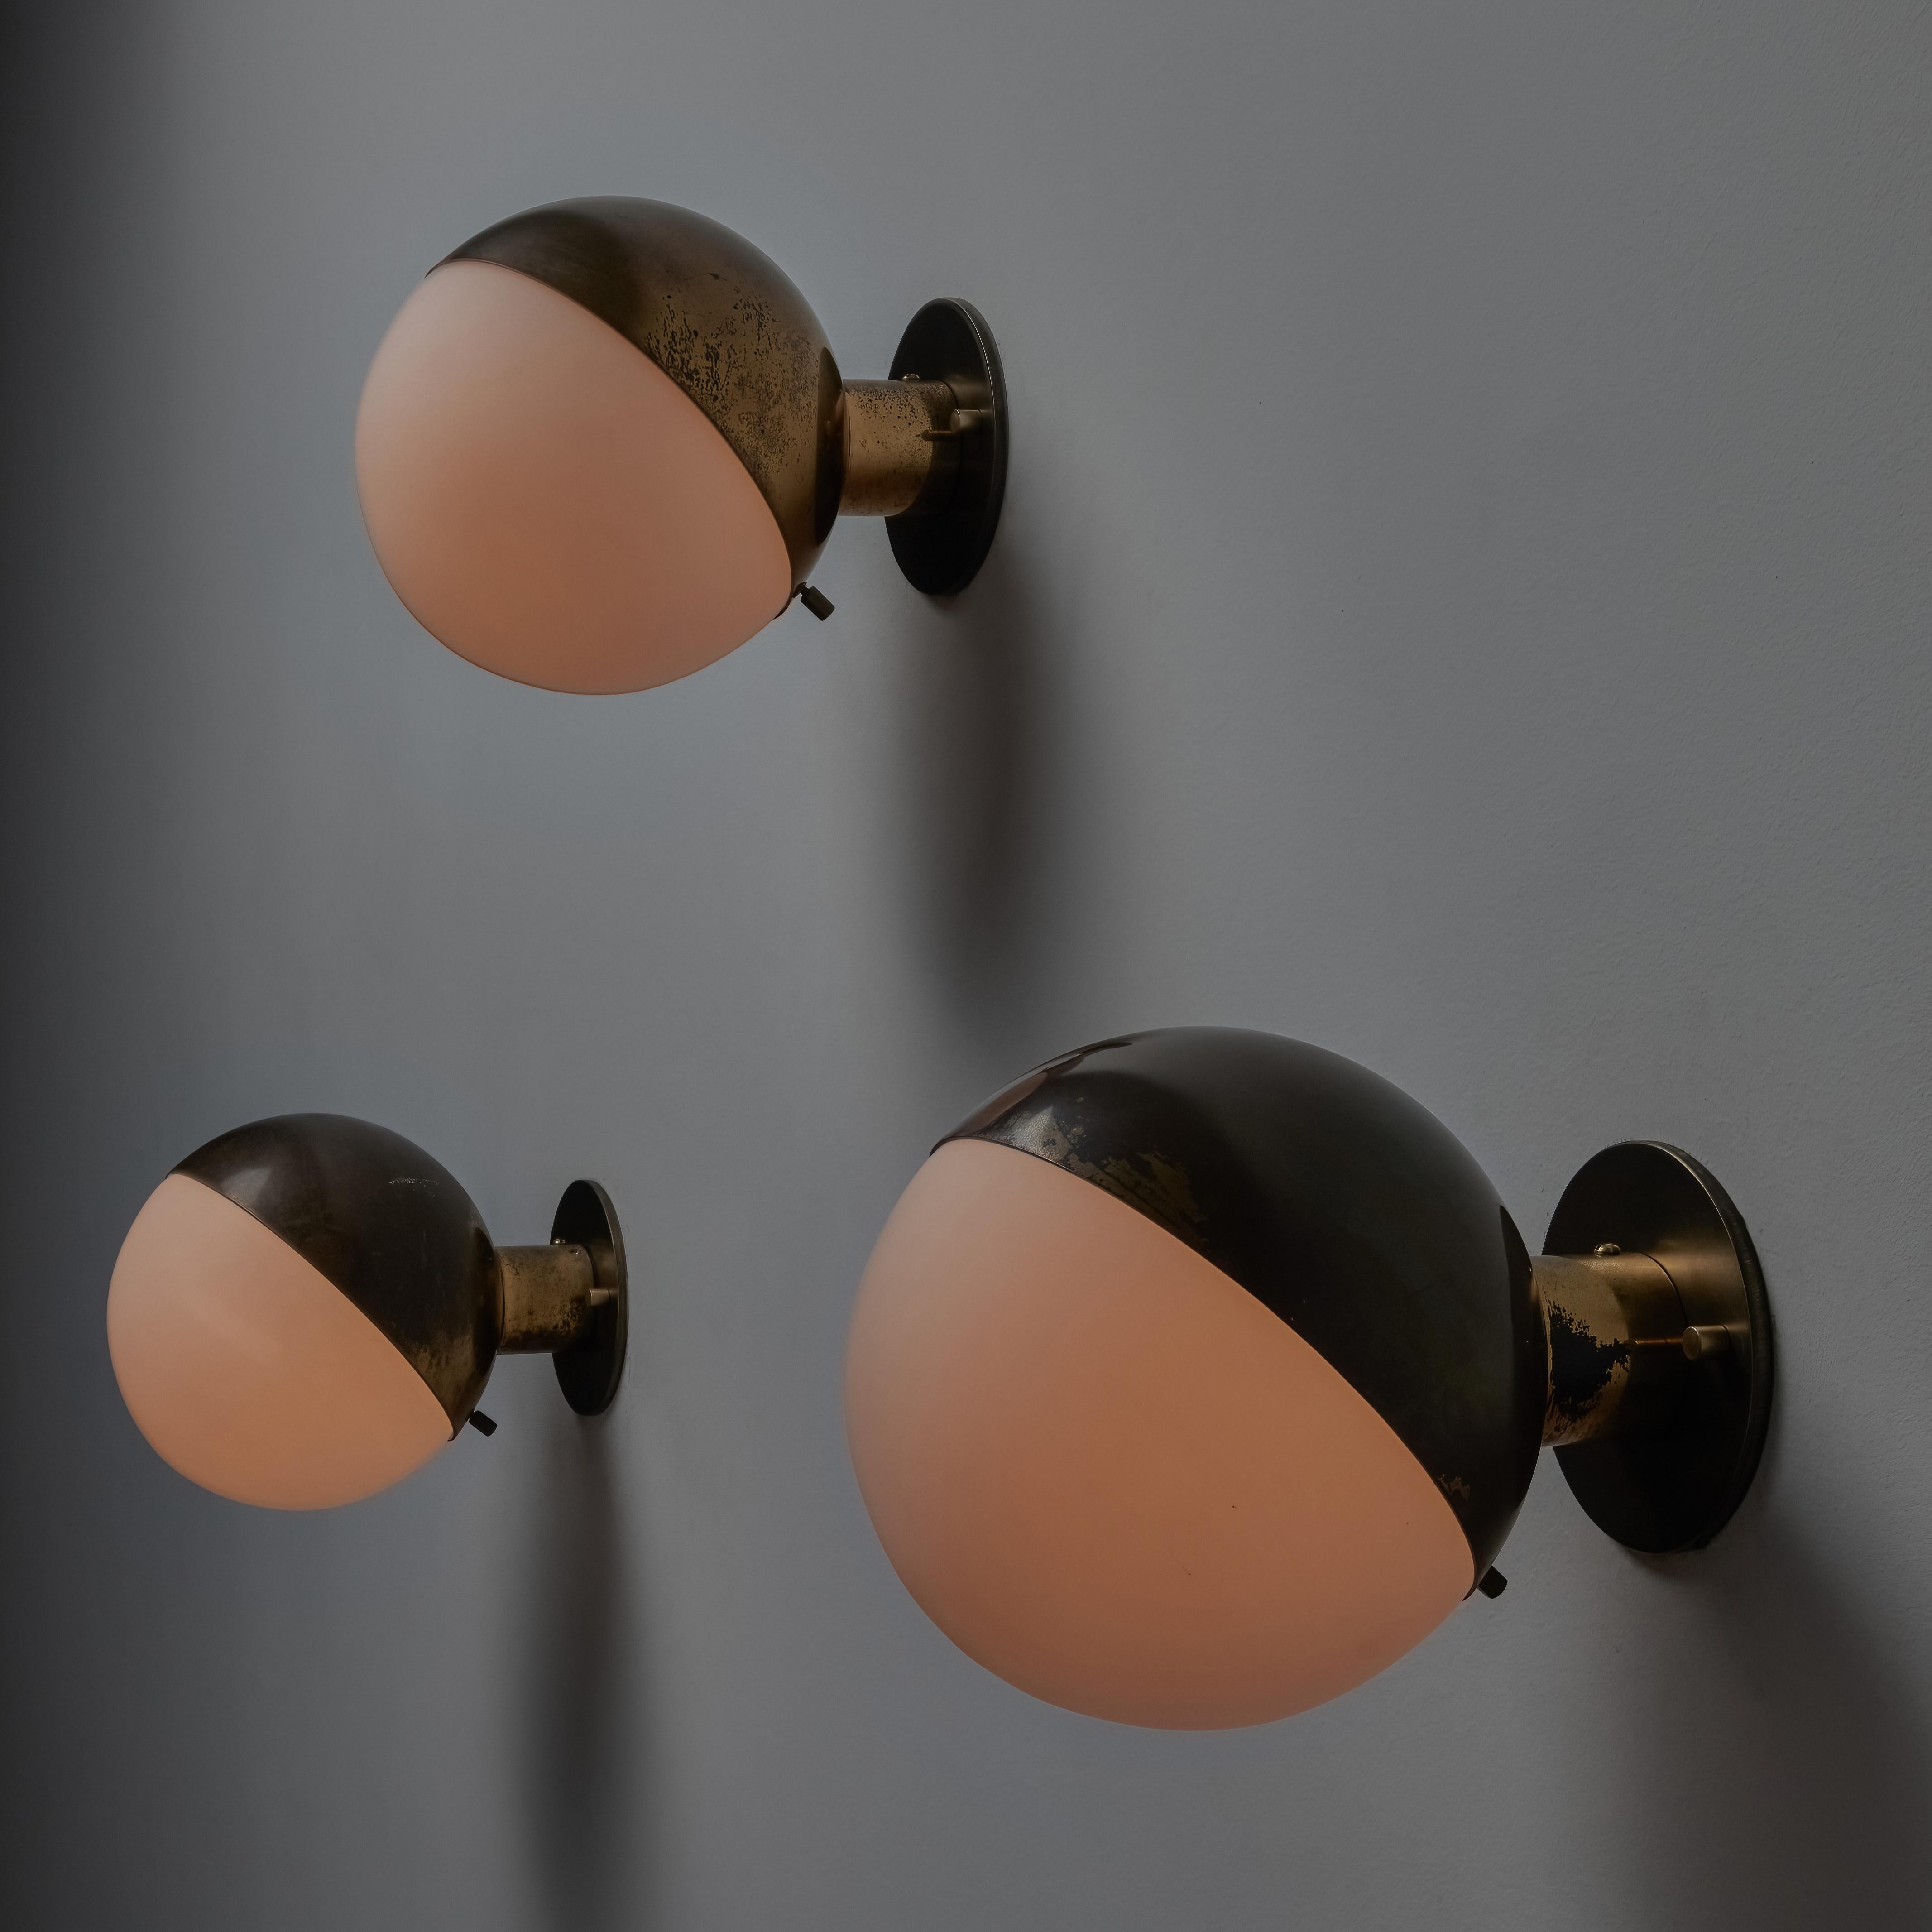 Model 2045 sconces by Stilnovo. Designed and manufactured in Italy, circa the 1950s. A true minimalist approach to these simple but striking ball sconces. A brass armature and top half shade, nestles a sandblasted opal glass globe. Each sconce